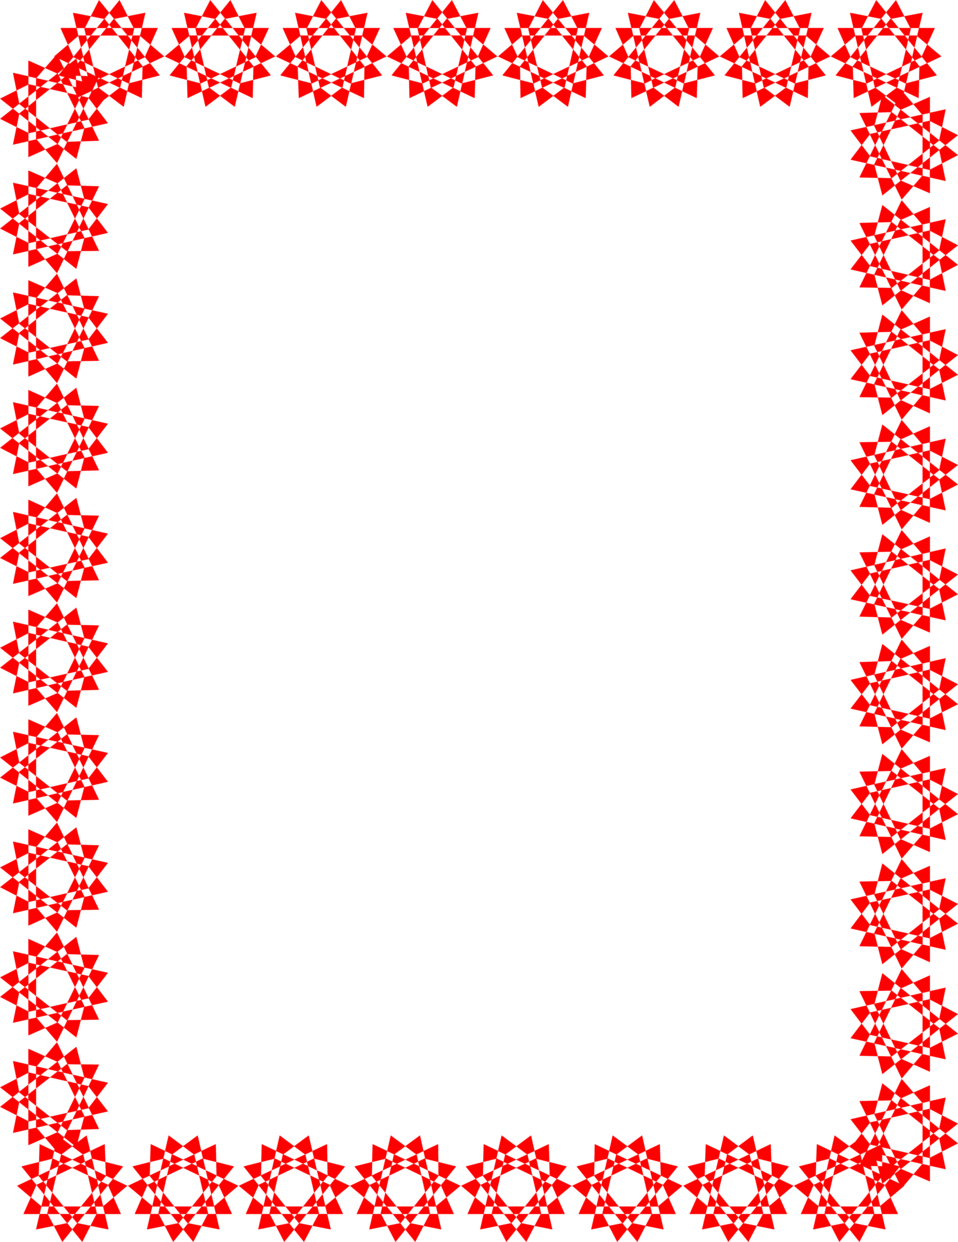 Illustration Of A Blank Frame Border Of Red Star Shapes - Circle (958x1242)